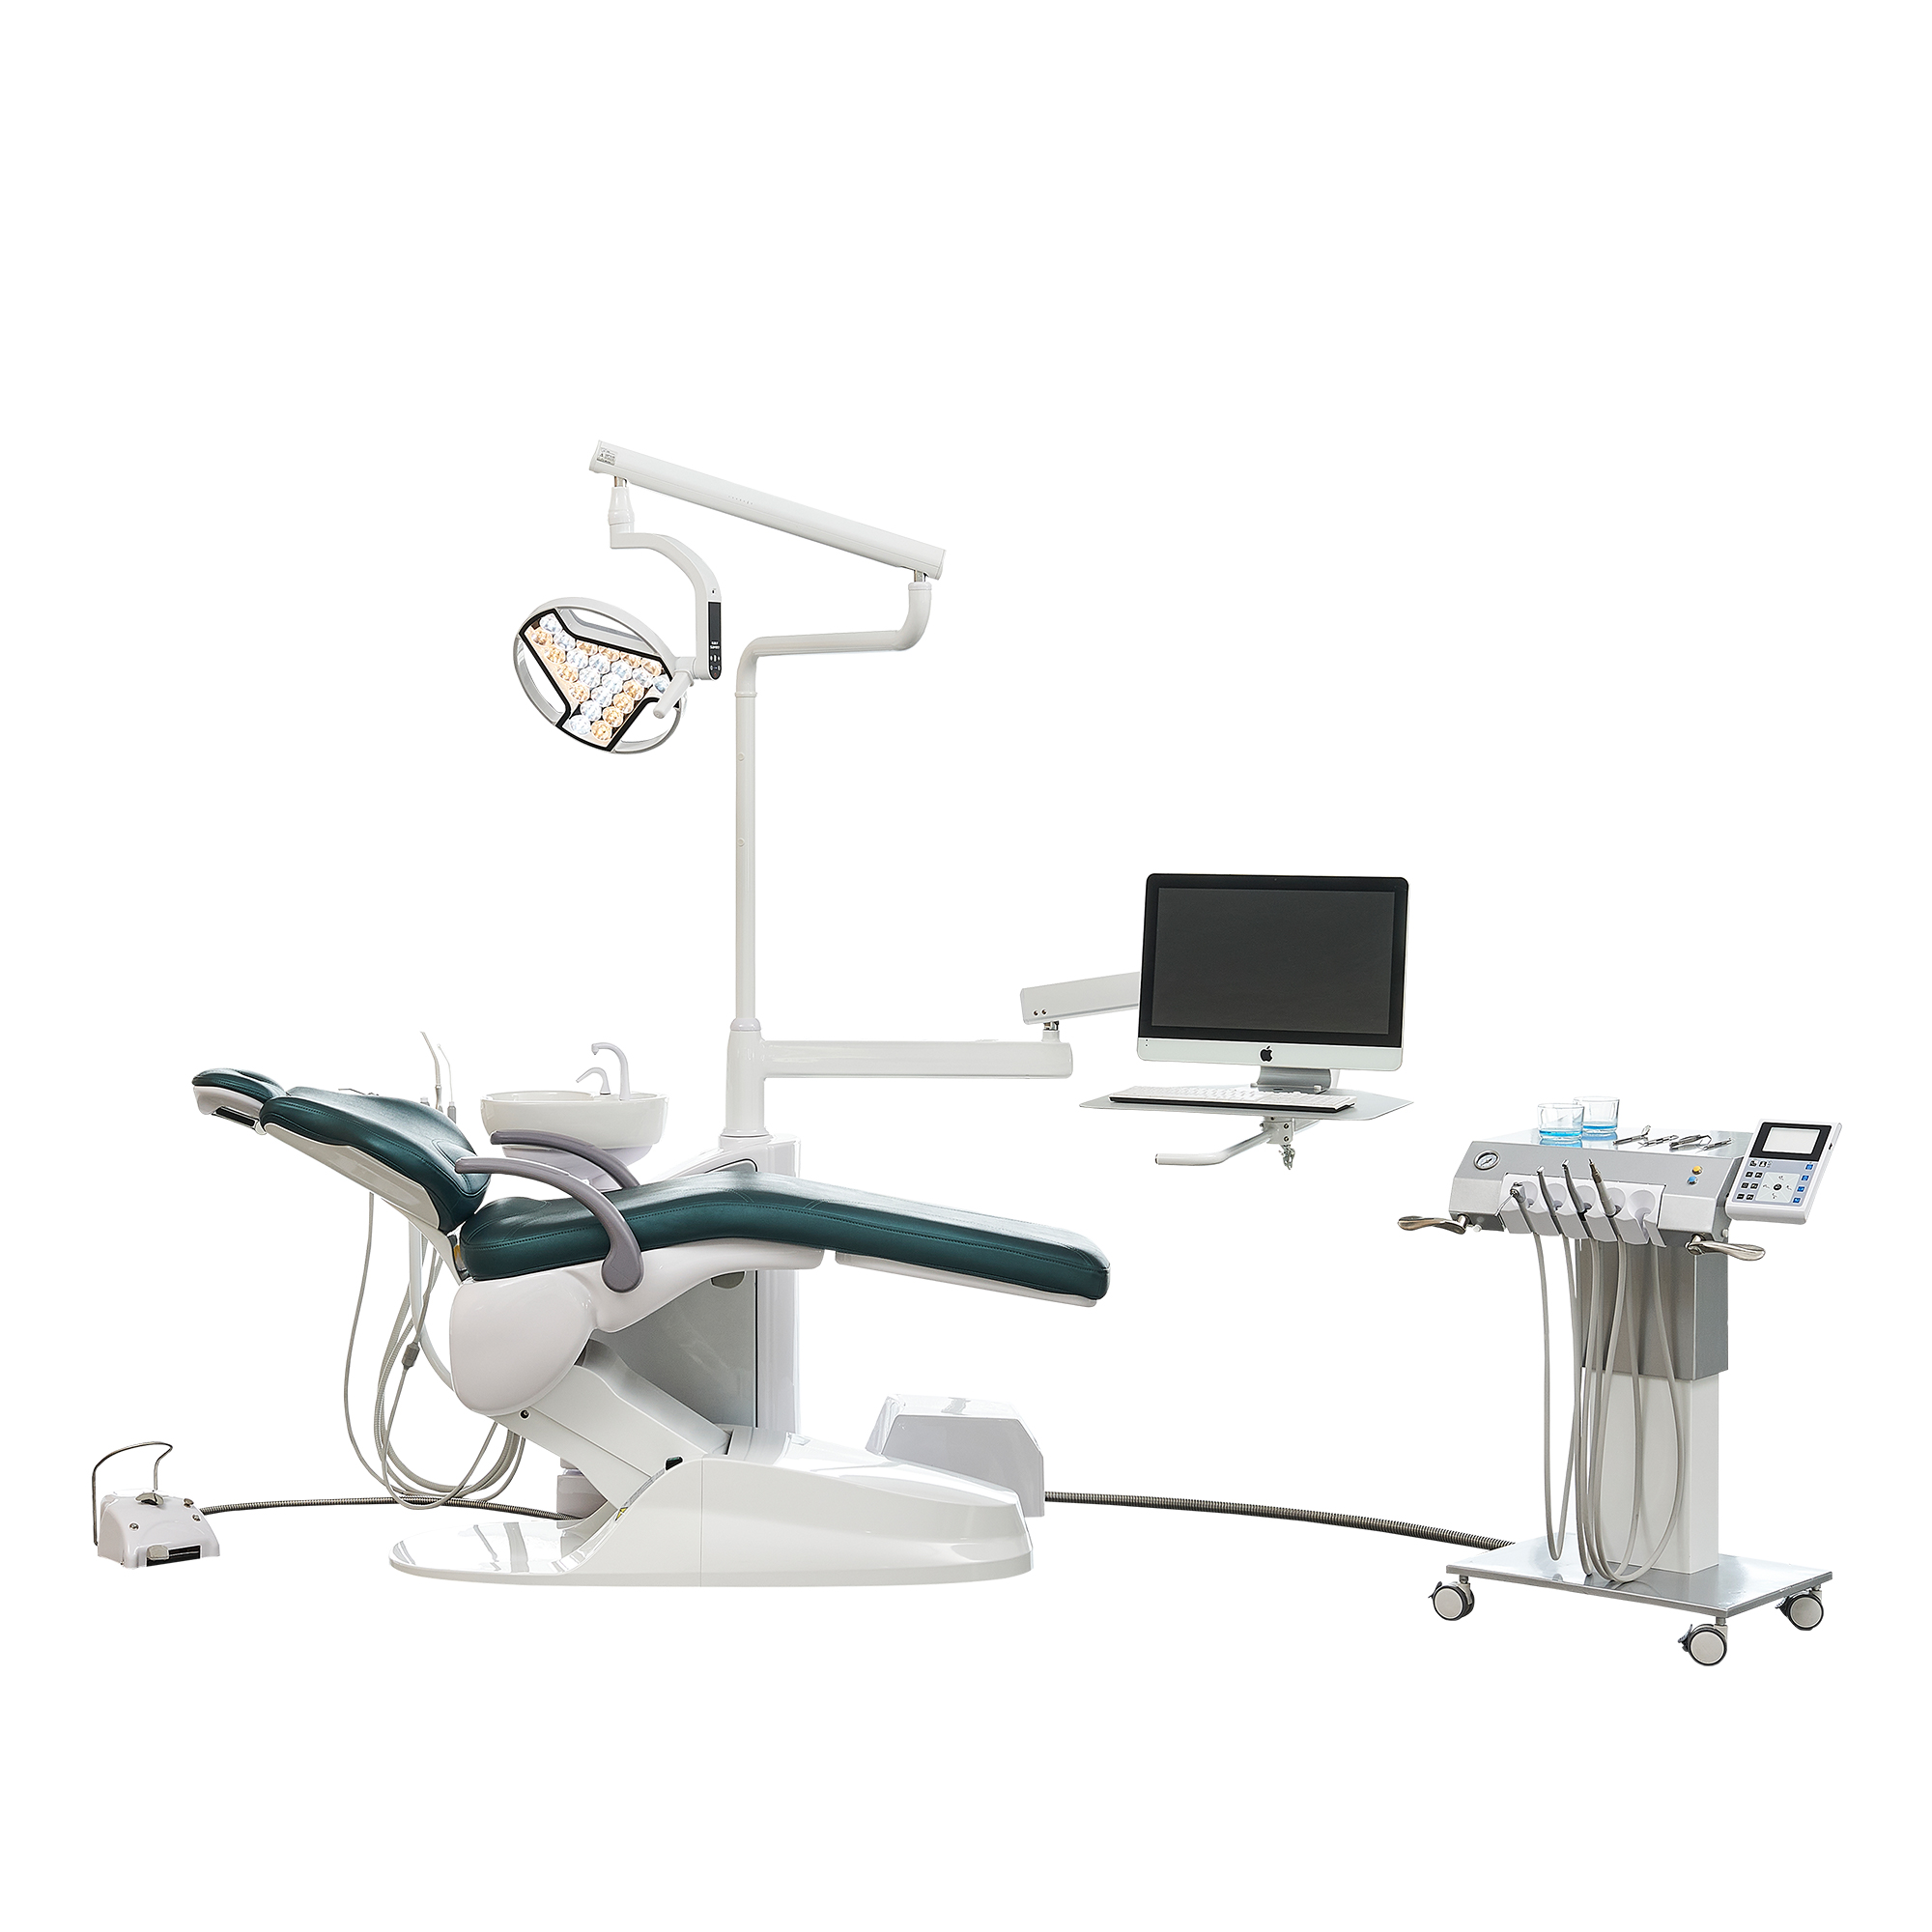 implant operation chair